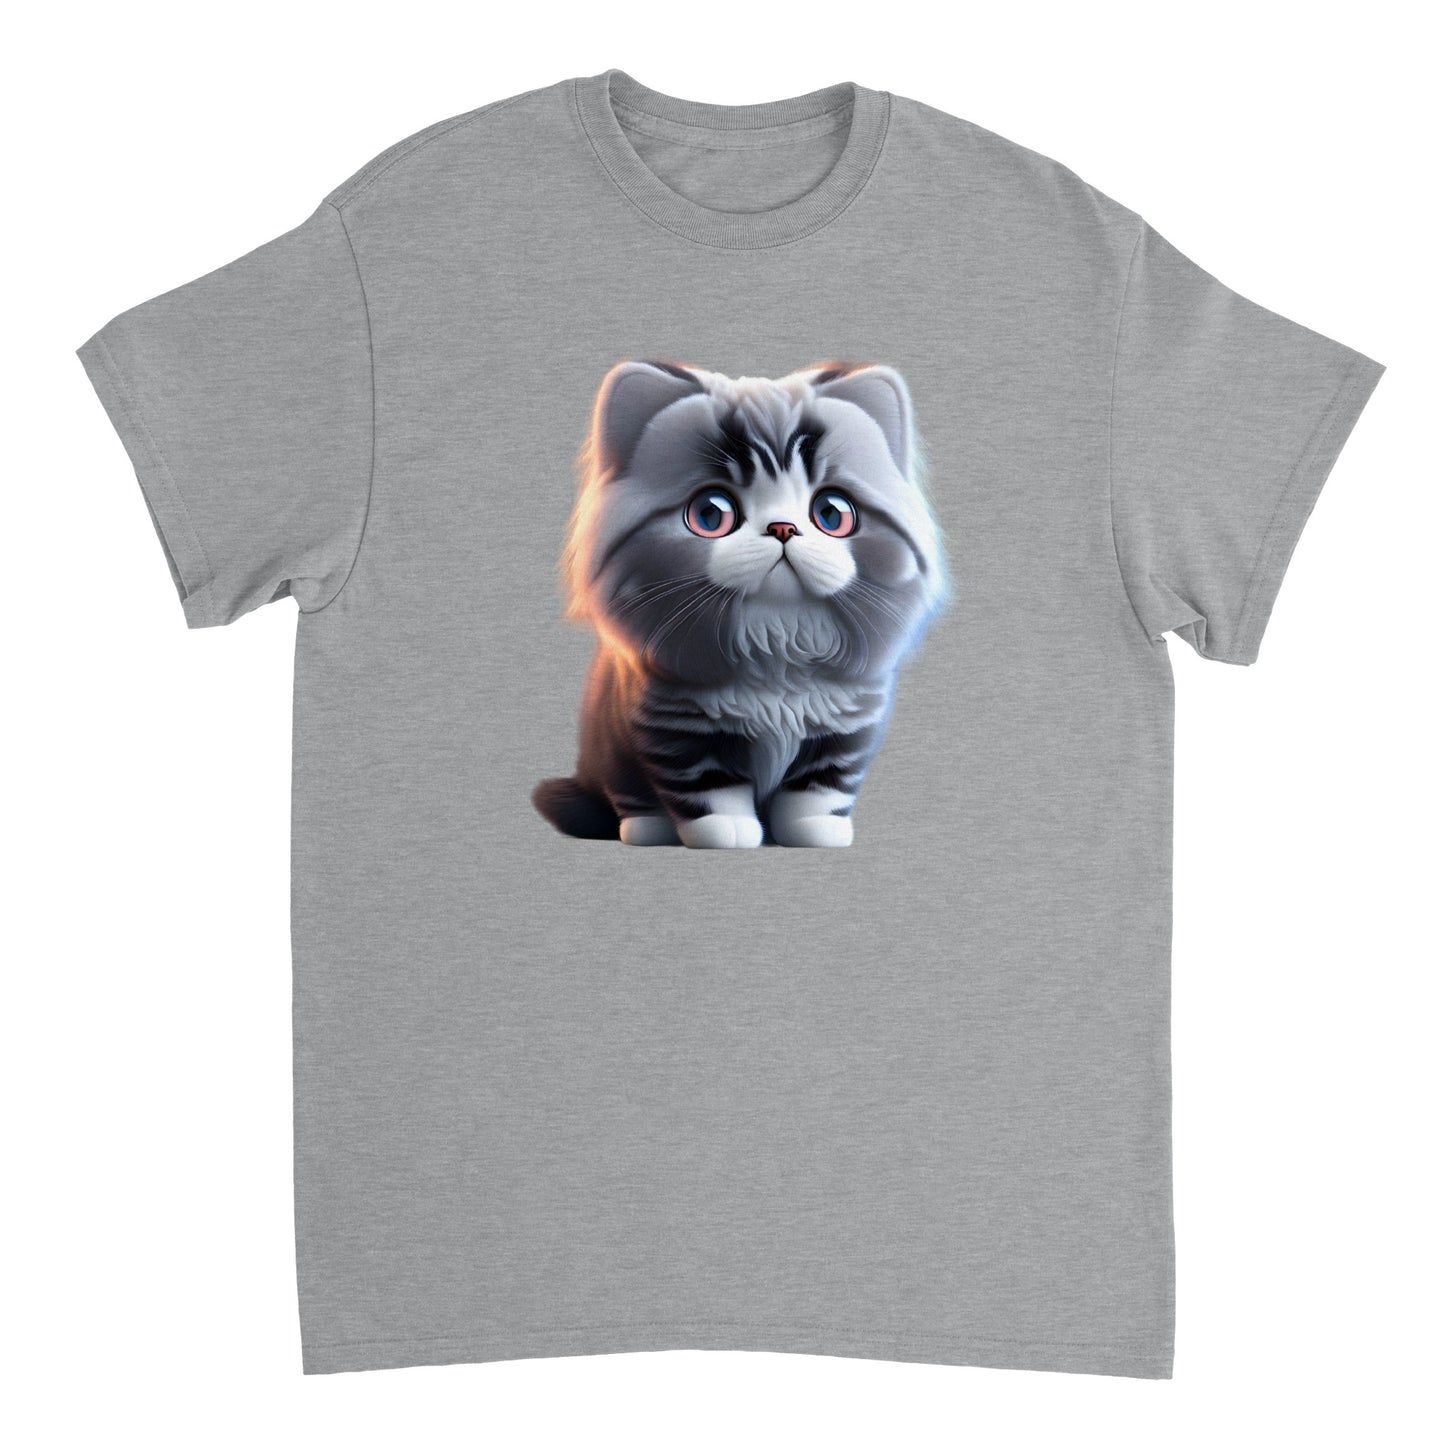 Adorable, Cool, Cute Cats and Kittens Toy - Heavyweight Unisex Crewneck T-shirt 15